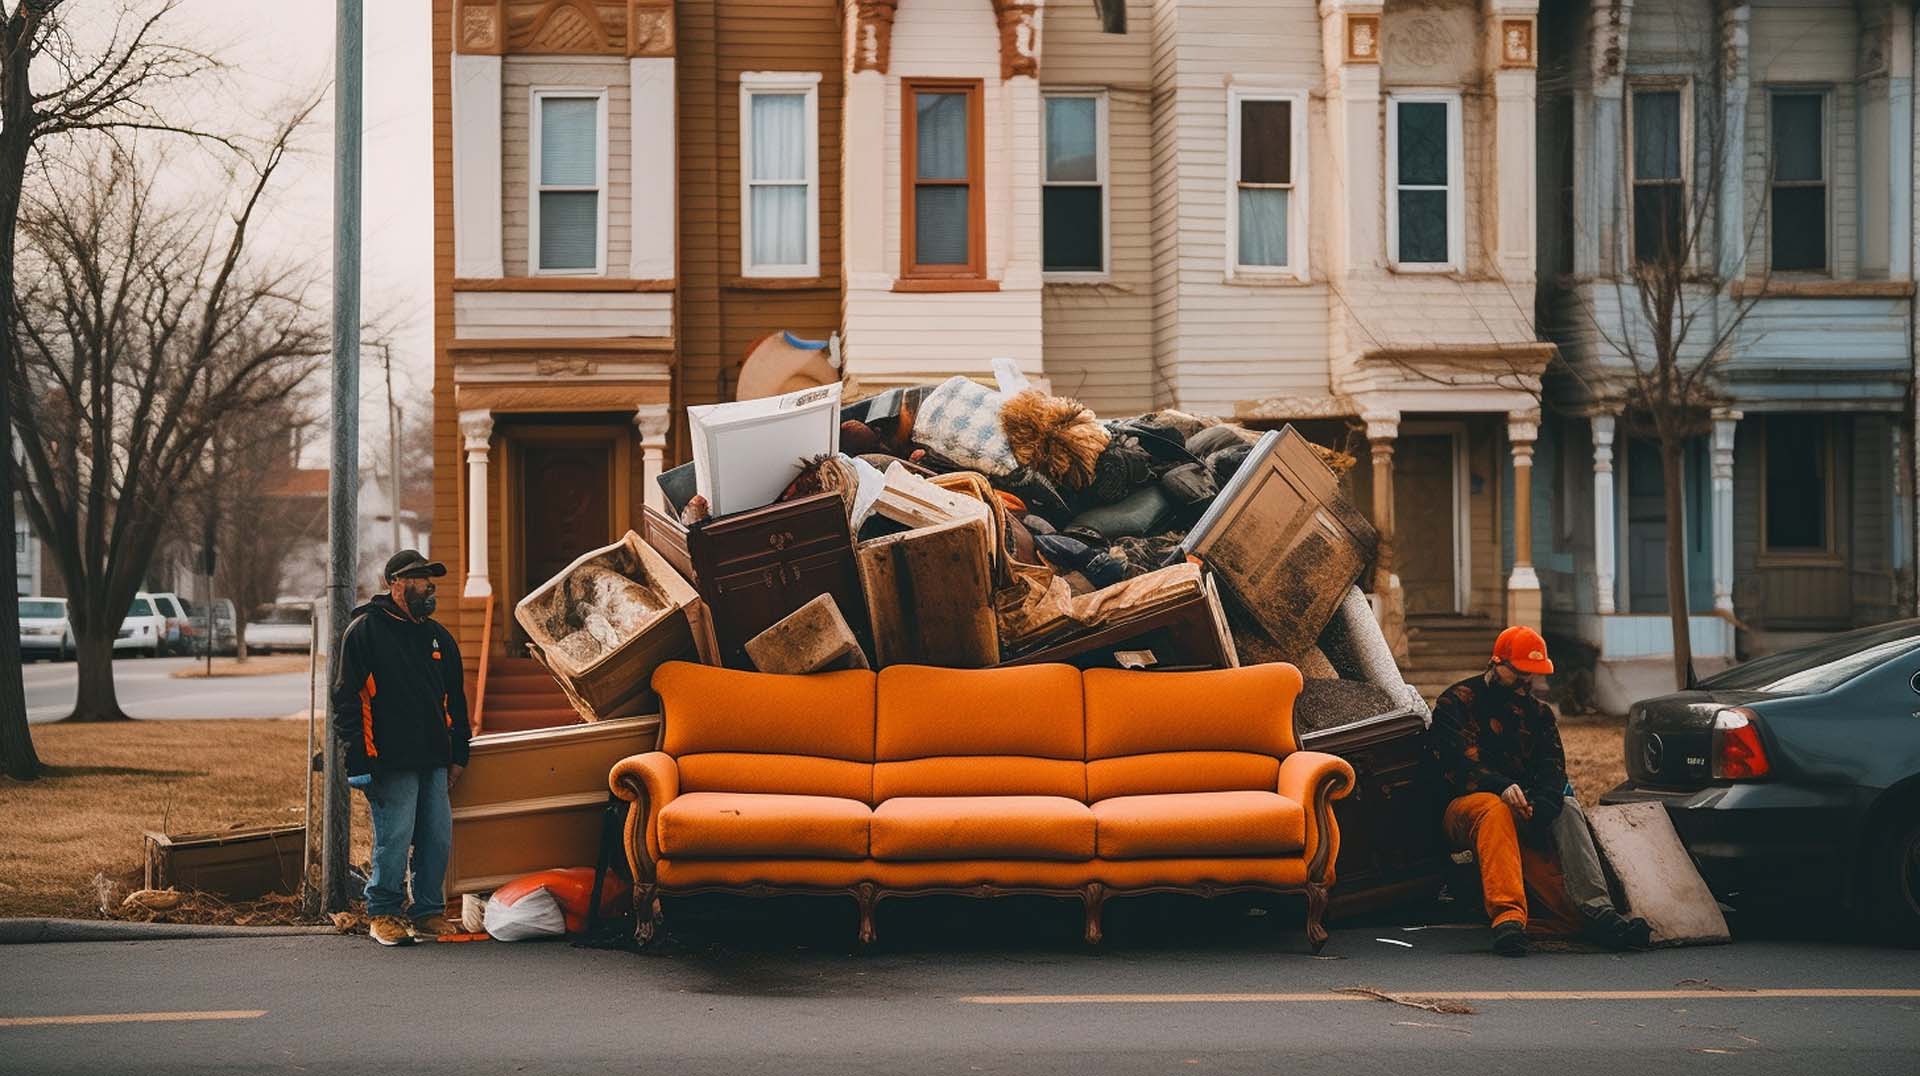 Residential Junk Removal Services in Joliette